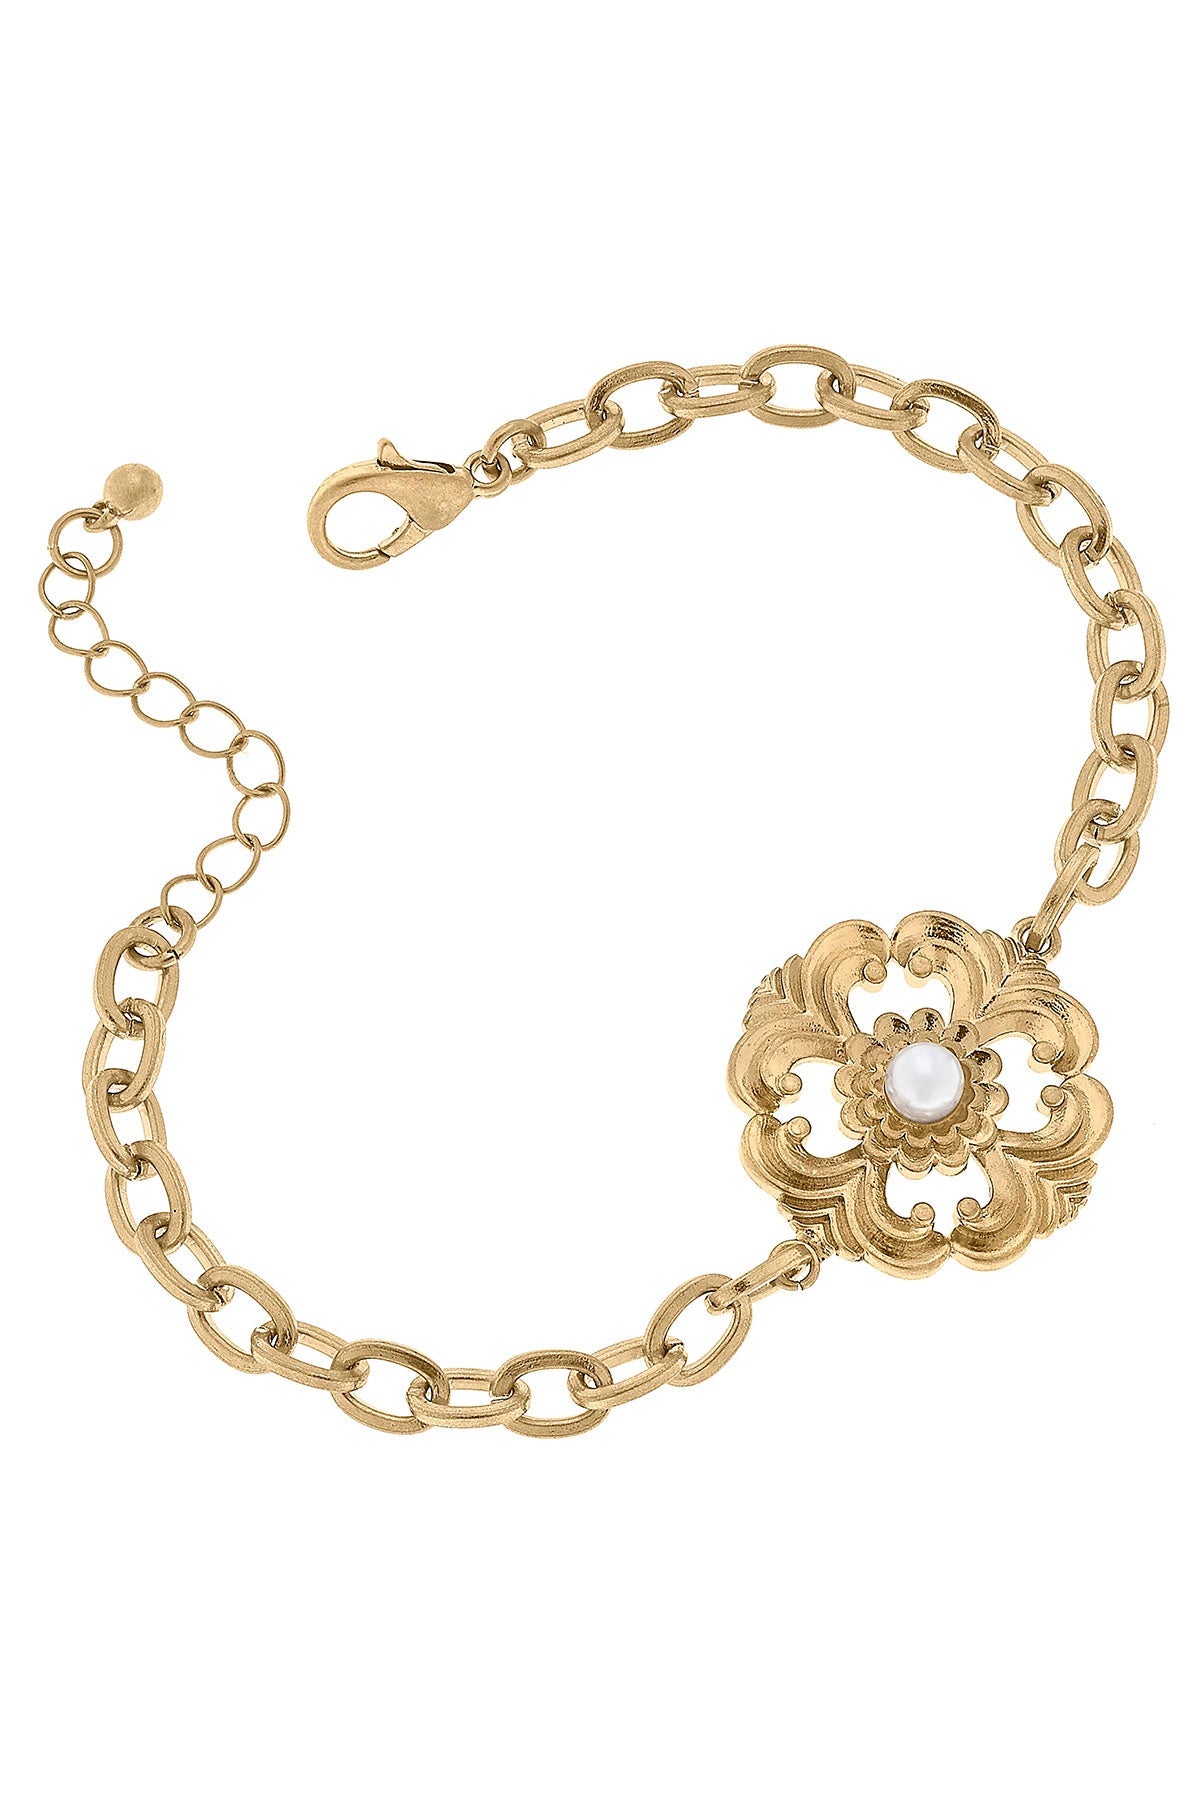 Orleans Acanthus & Pearl Chain Bracelet in Worn Gold by CANVAS